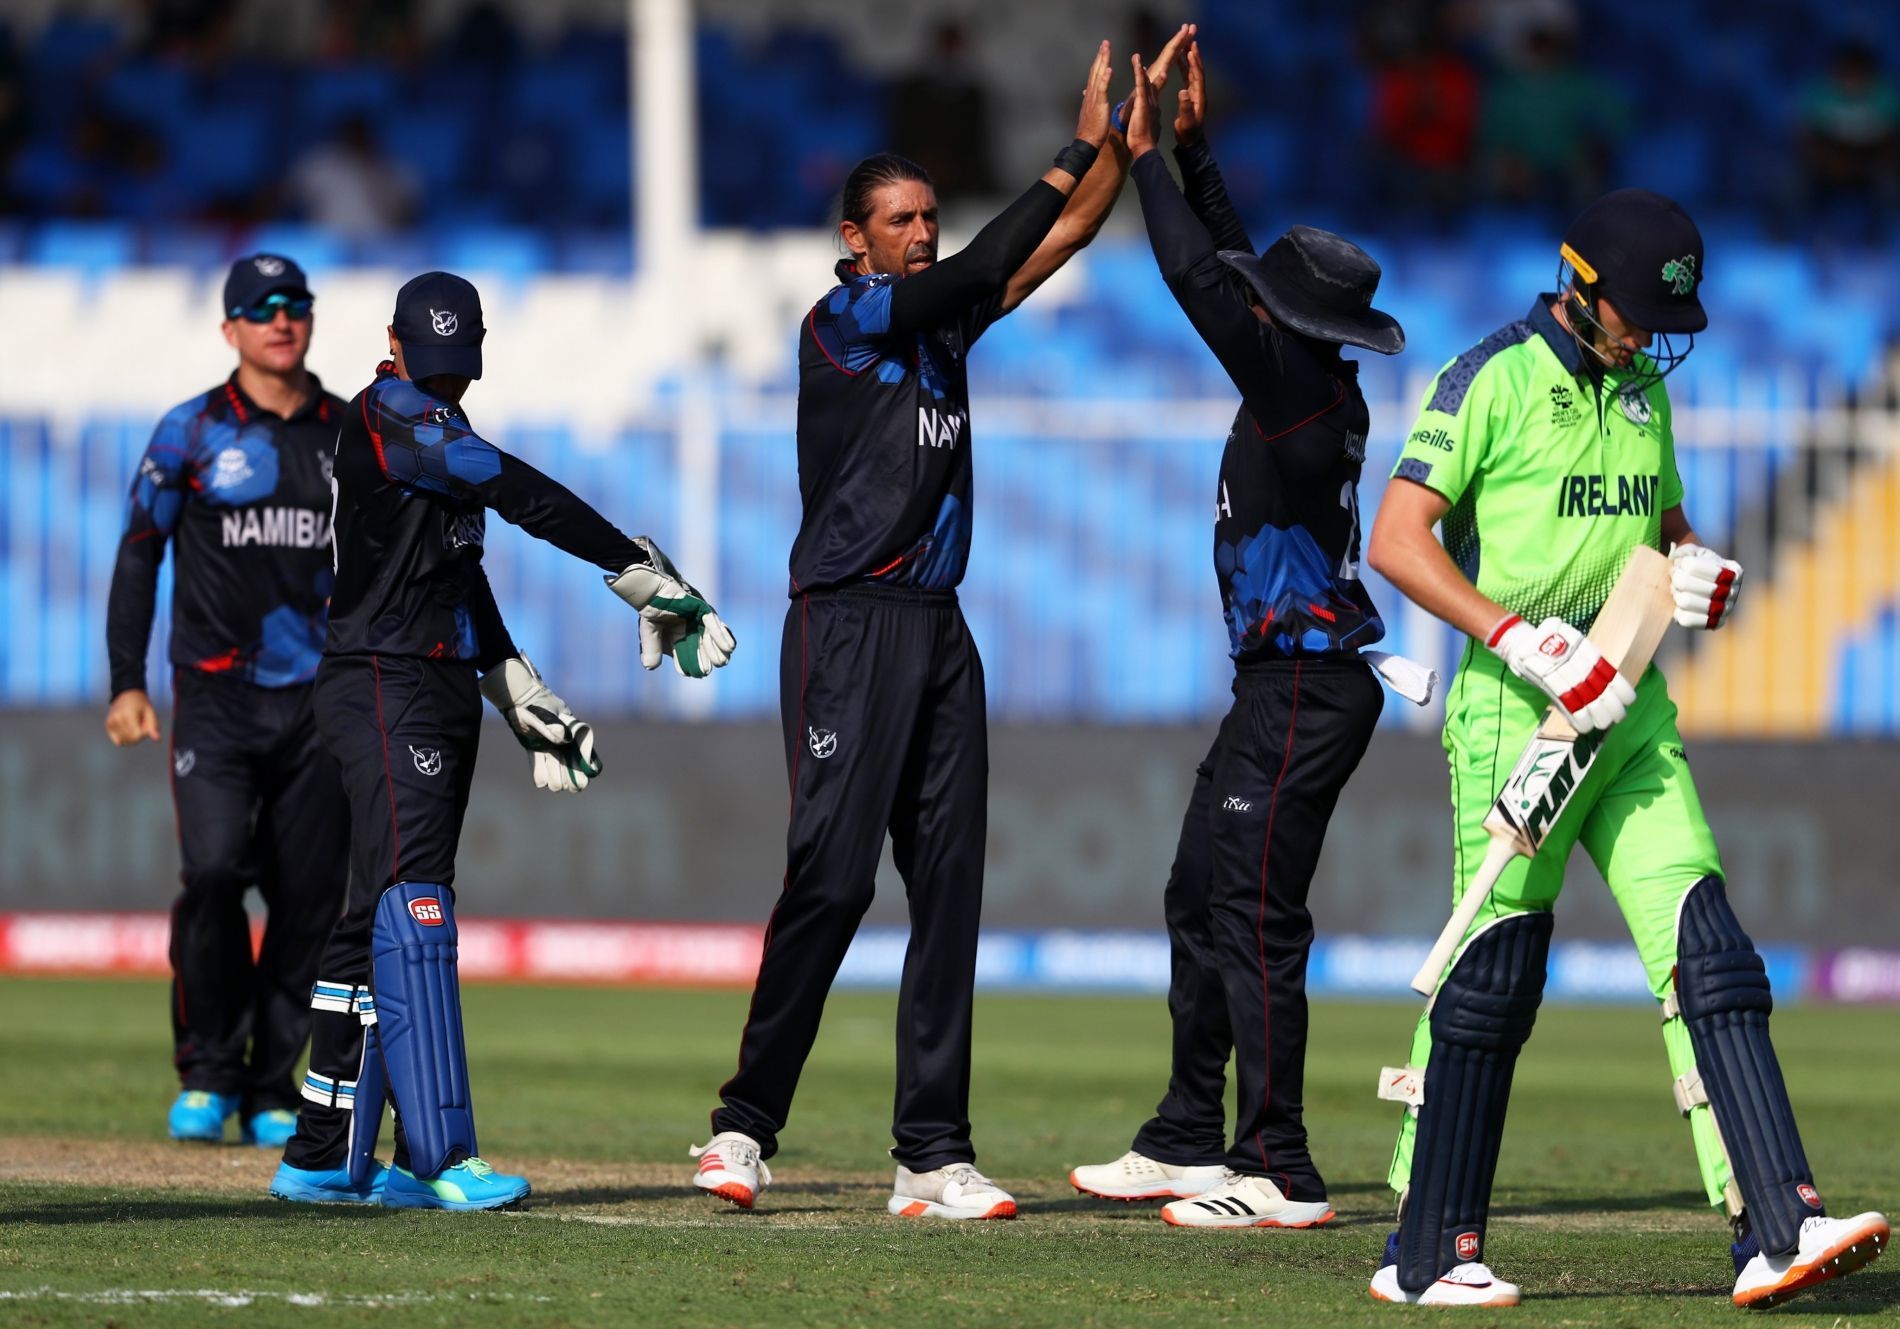 Namibia outclassed Ireland with a good all-round effort. Pic: T20WorldCup/ Twitter